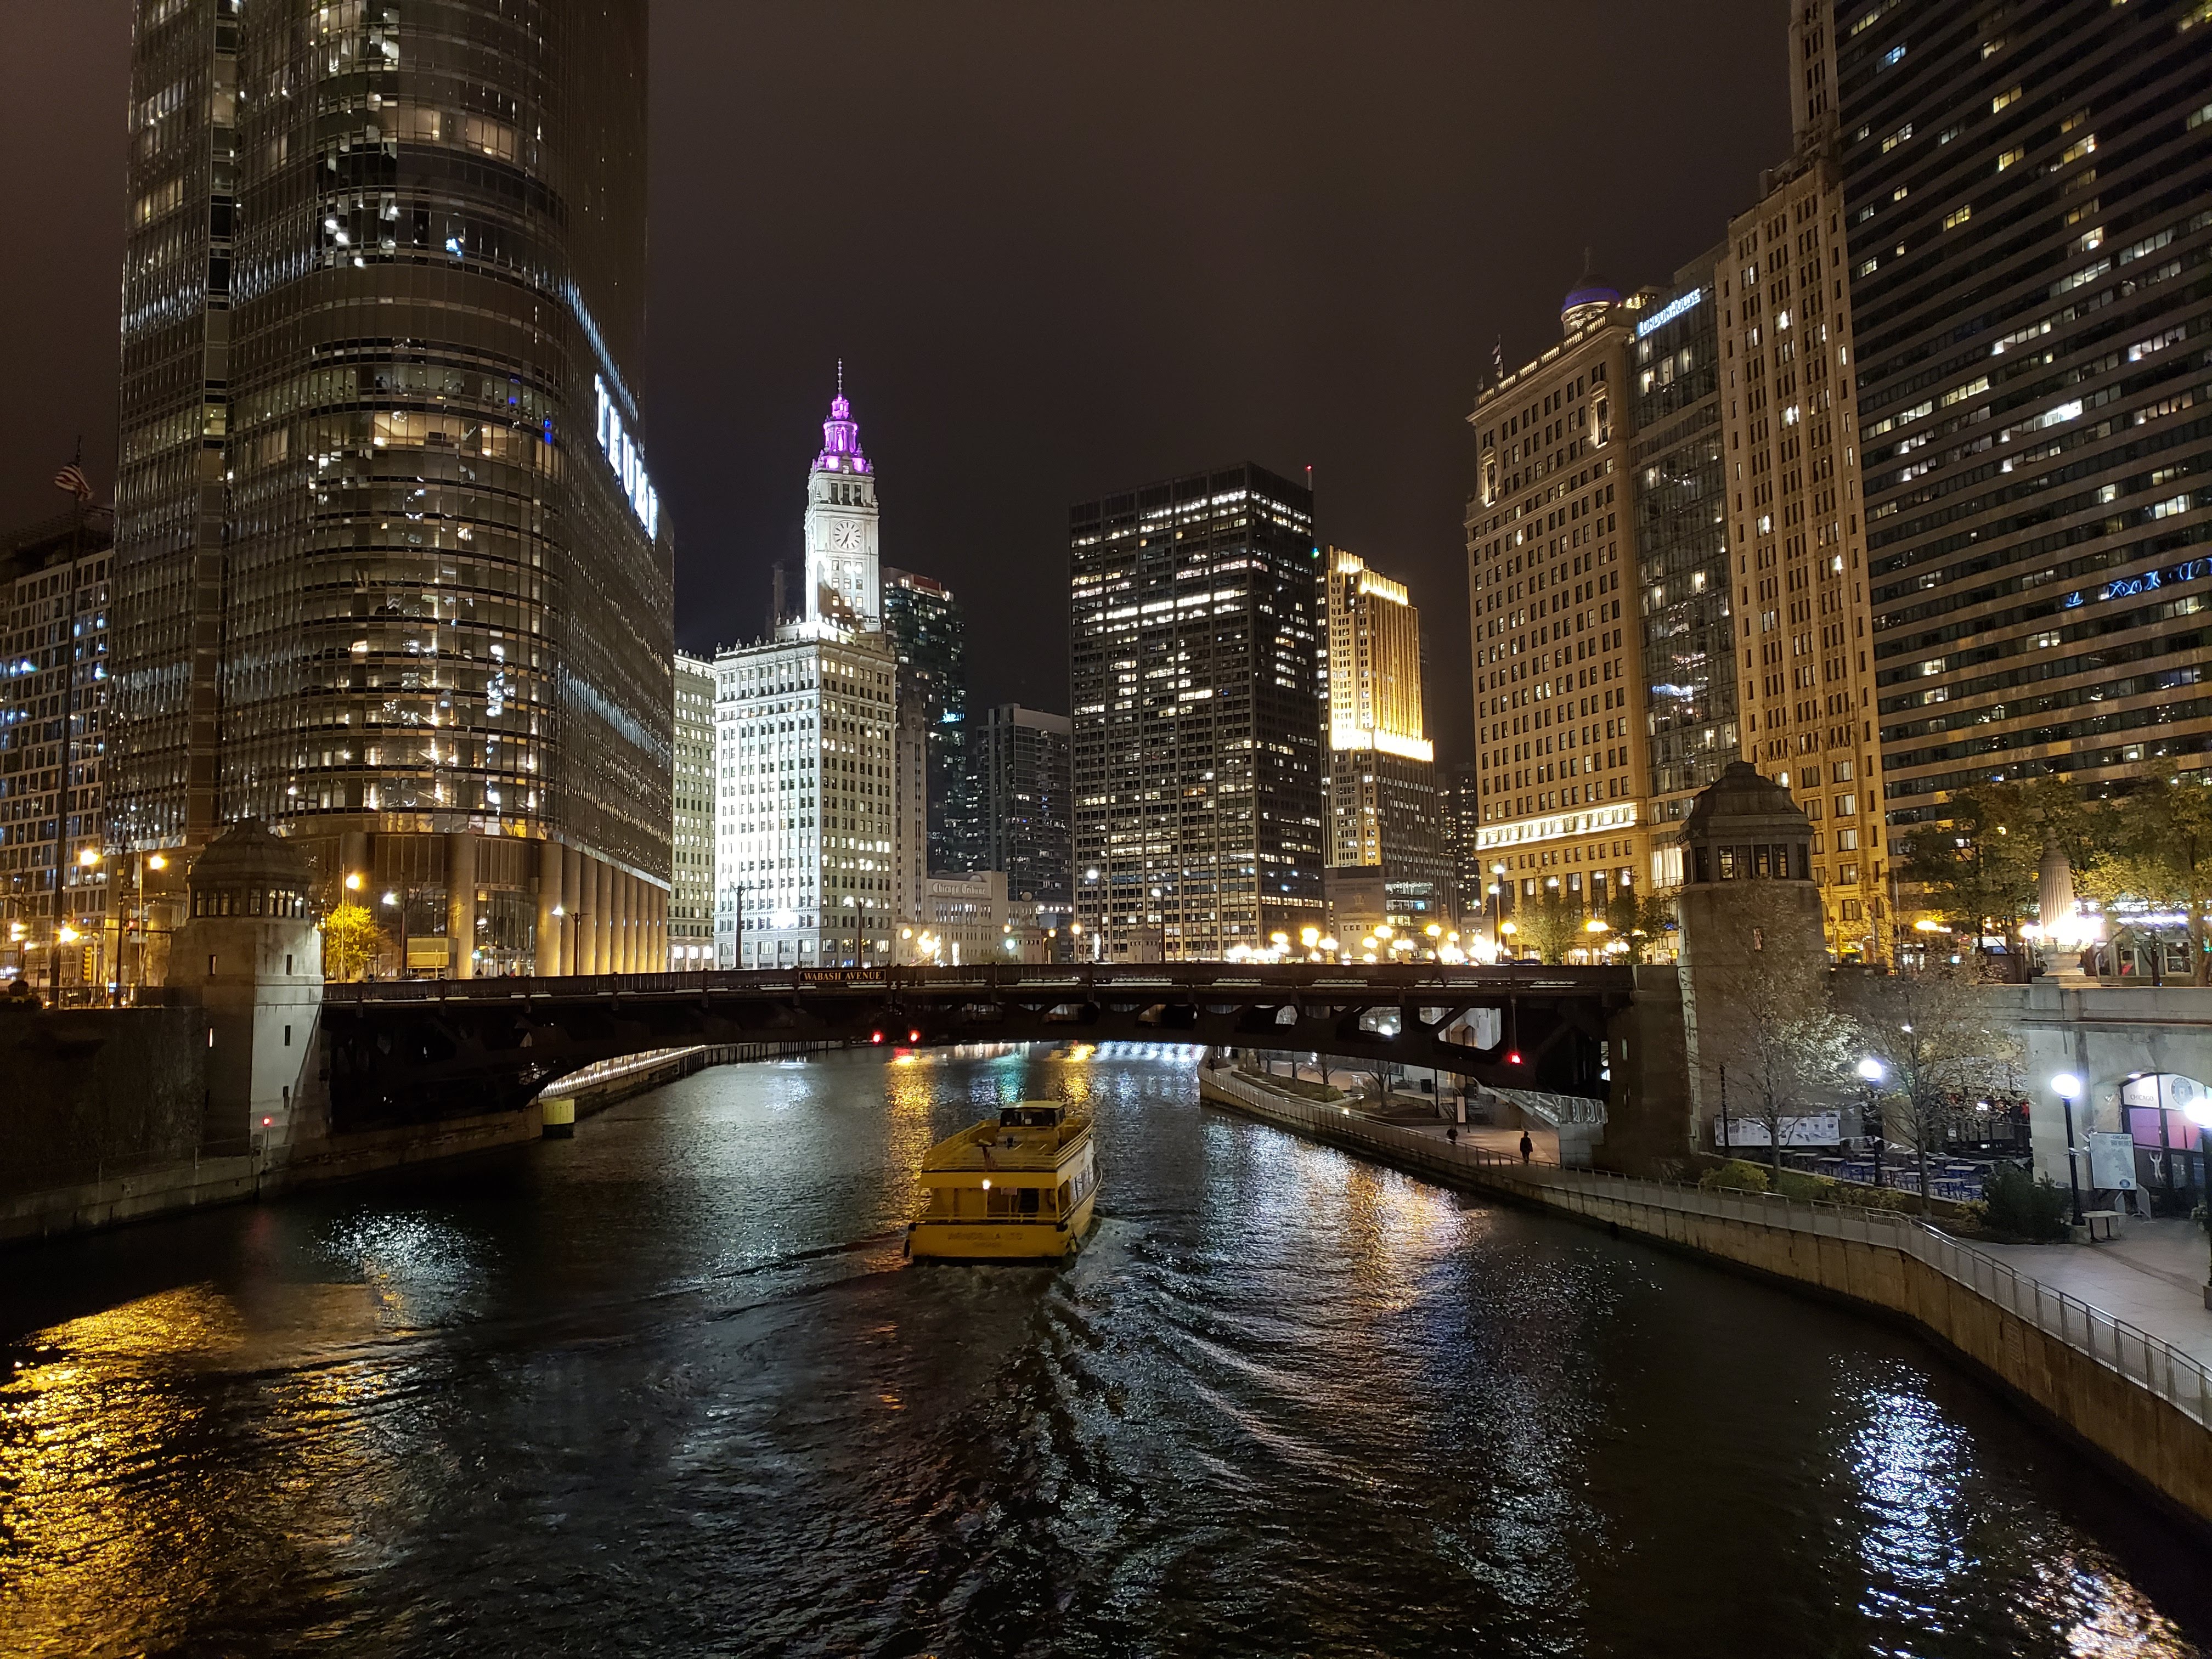 The Chicago river at night